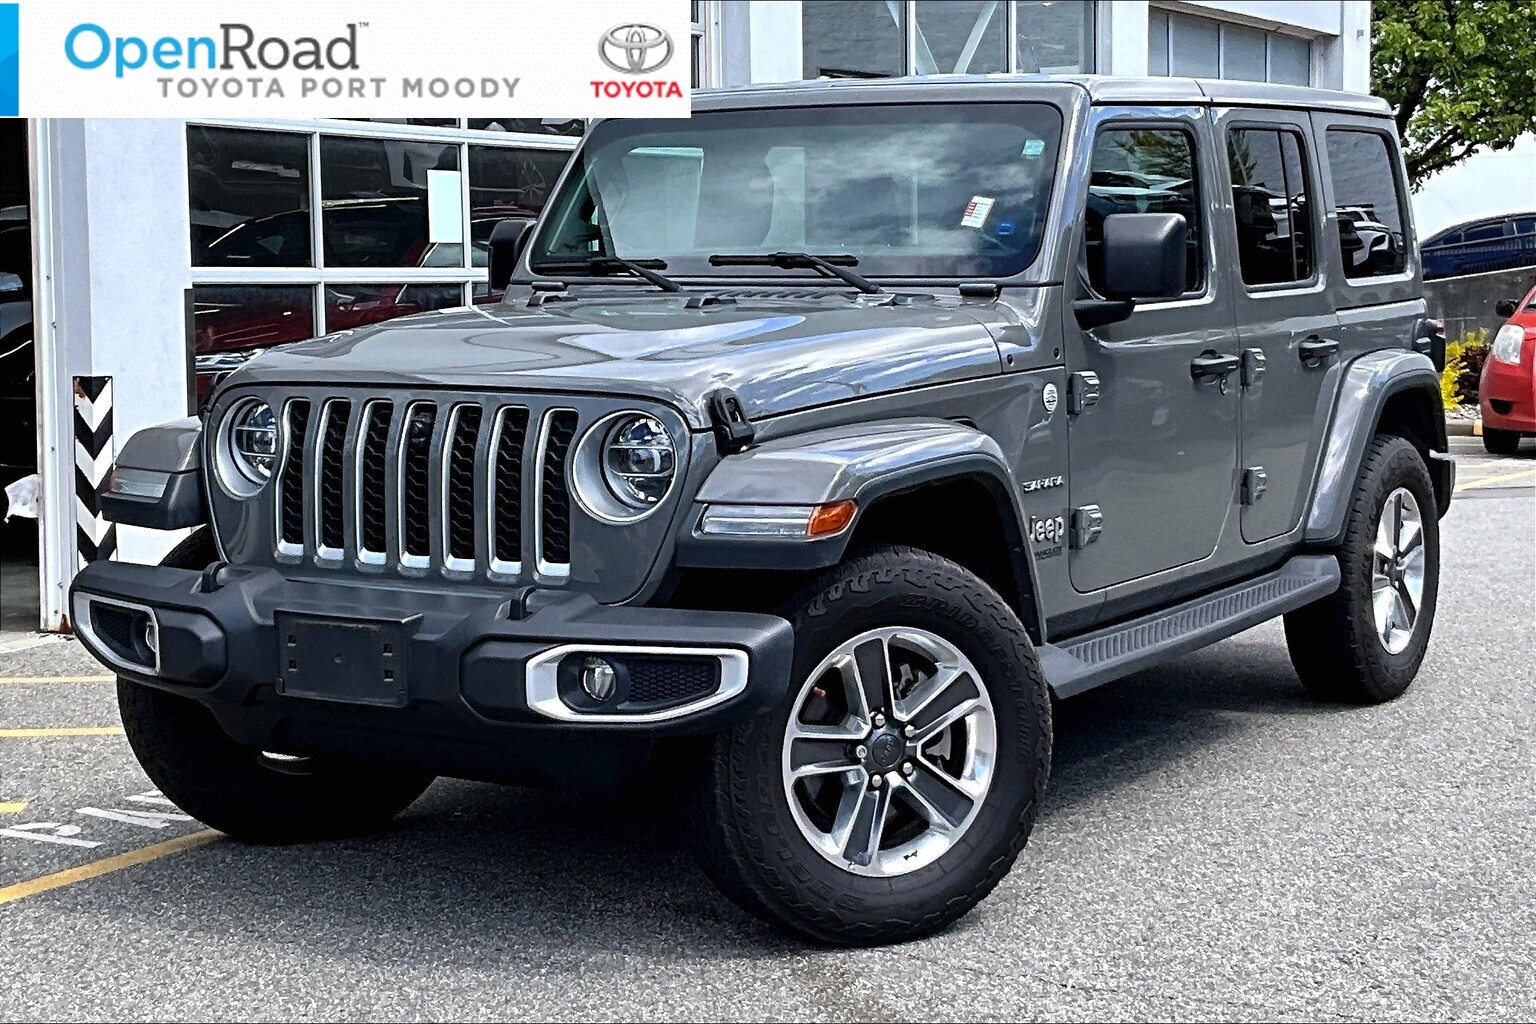 2021 Jeep WRANGLER UNLIMITED Sahara |OpenRoad True Price |Local |One Owner |Ser